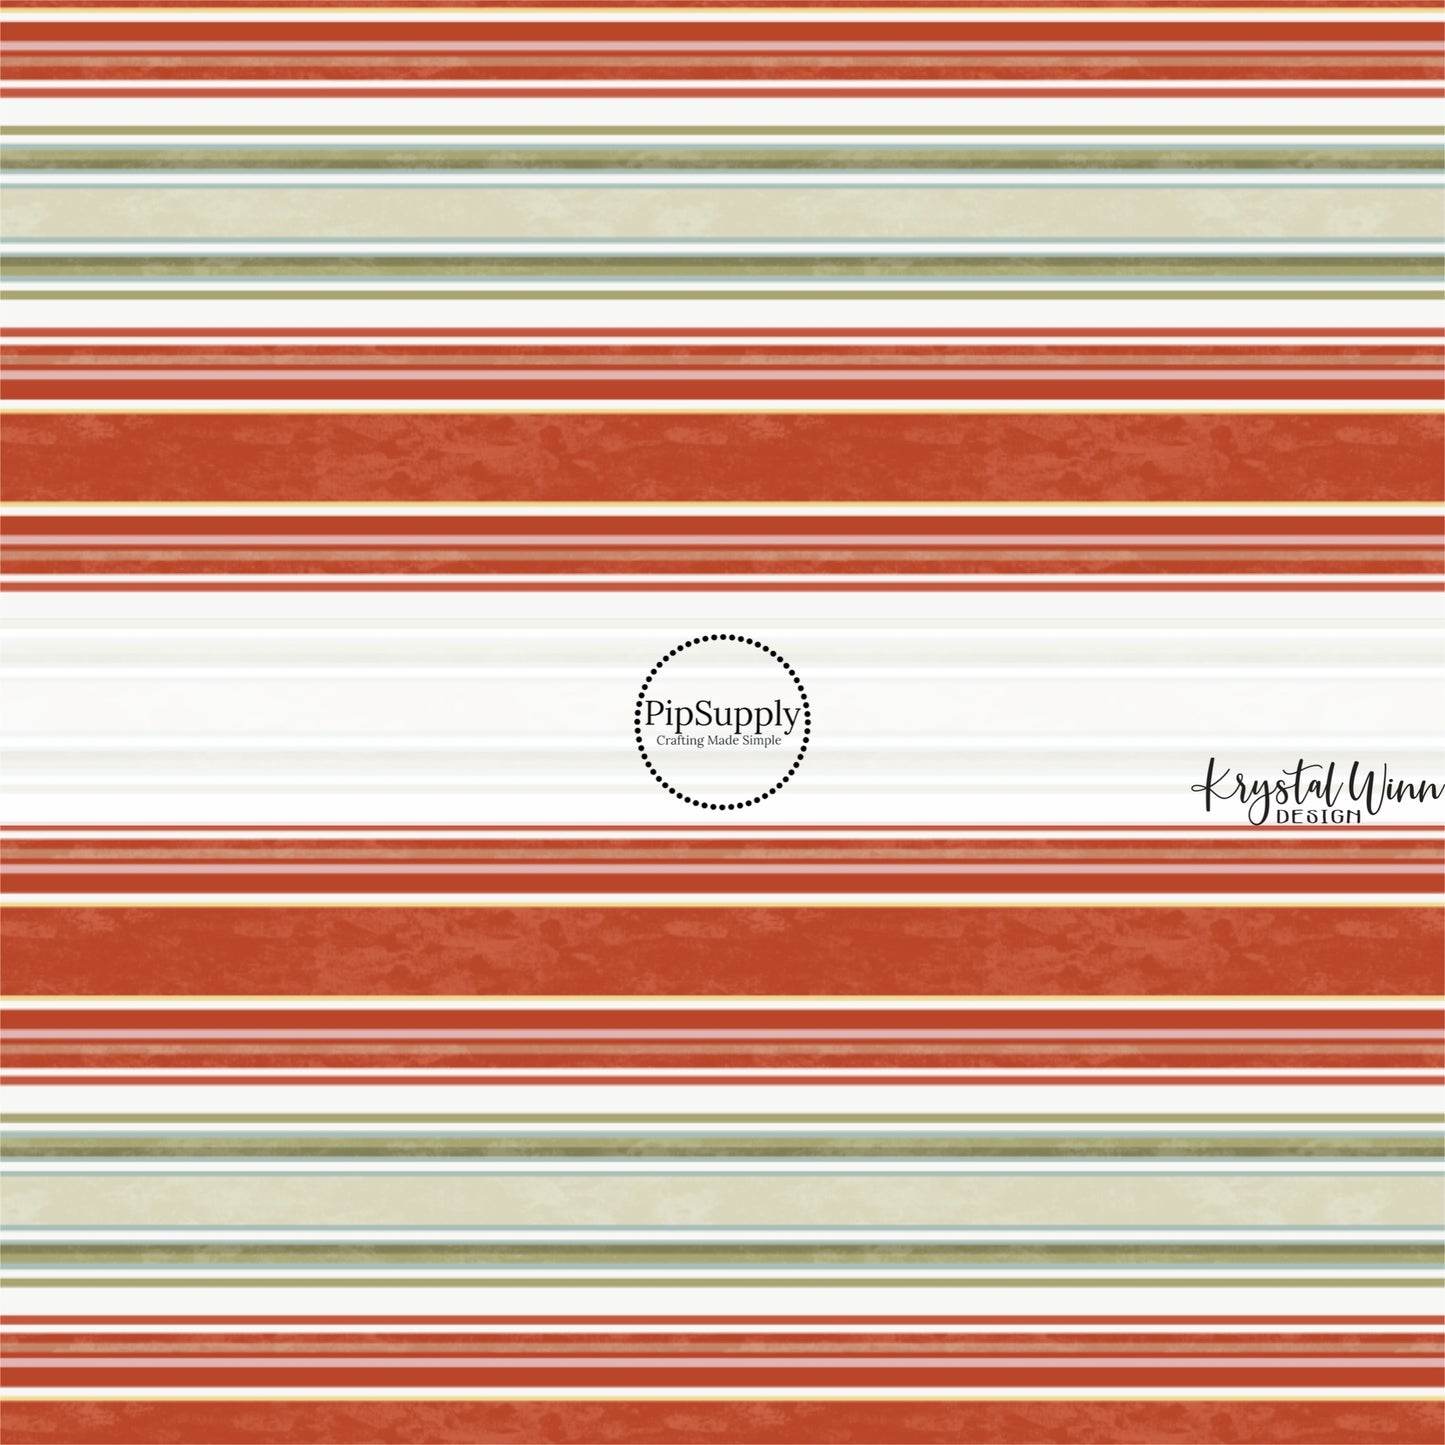 These holiday pattern themed fabric by the yard features light green, cream, and red stripes. This fun Christmas fabric can be used for all your sewing and crafting needs!